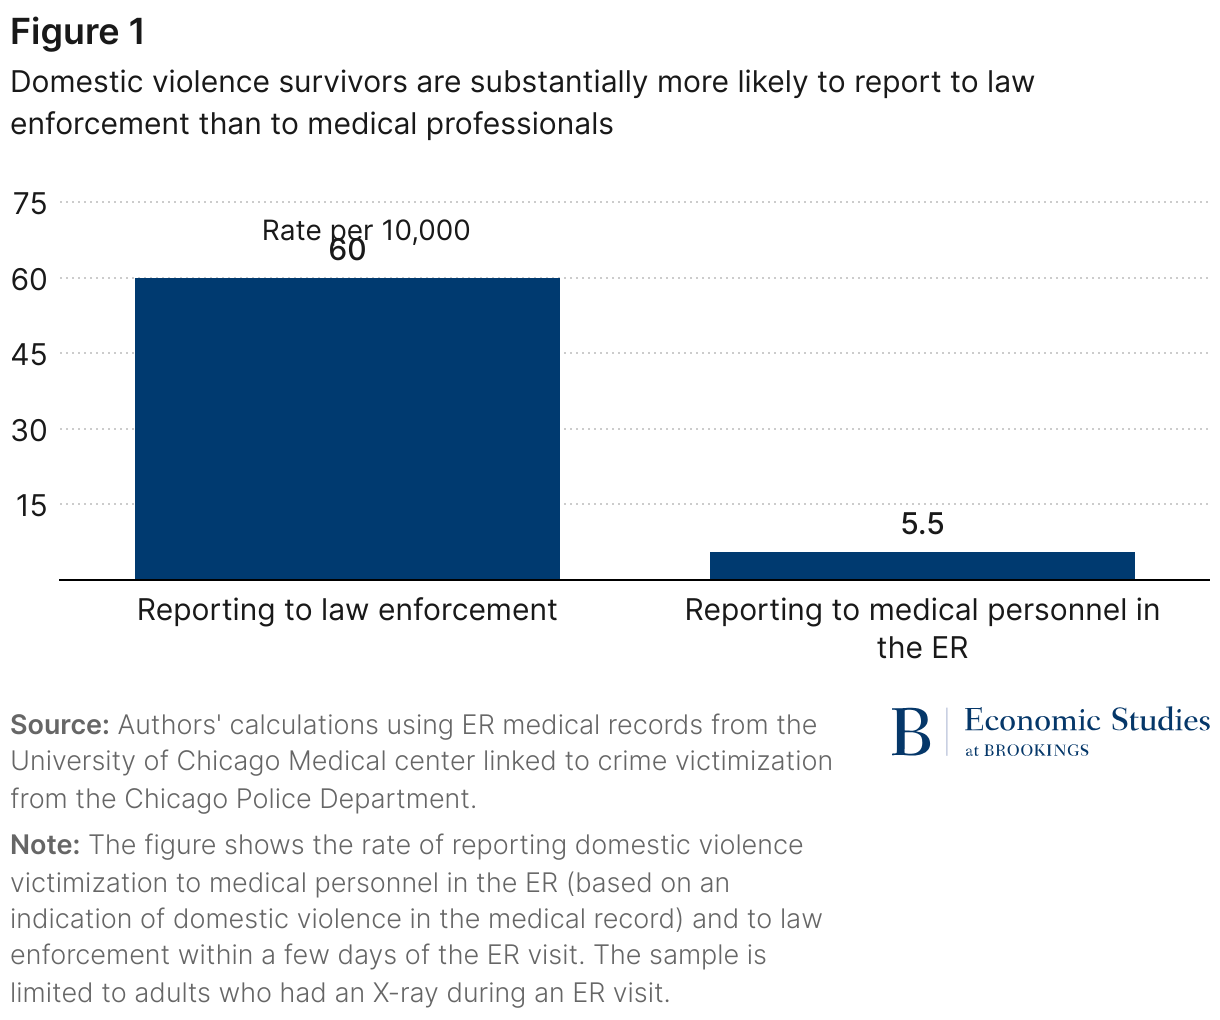 The figure shows the rate of reporting domestic violence victimization to medical personnel in the ER (5.5 per 10,000 - based on an indication of domestic violence in the medical record) and to law enforcement (60 per 10,000) within a few days of the ER visit. The sample is limited to adults who had an X-ray during an ER visit. 